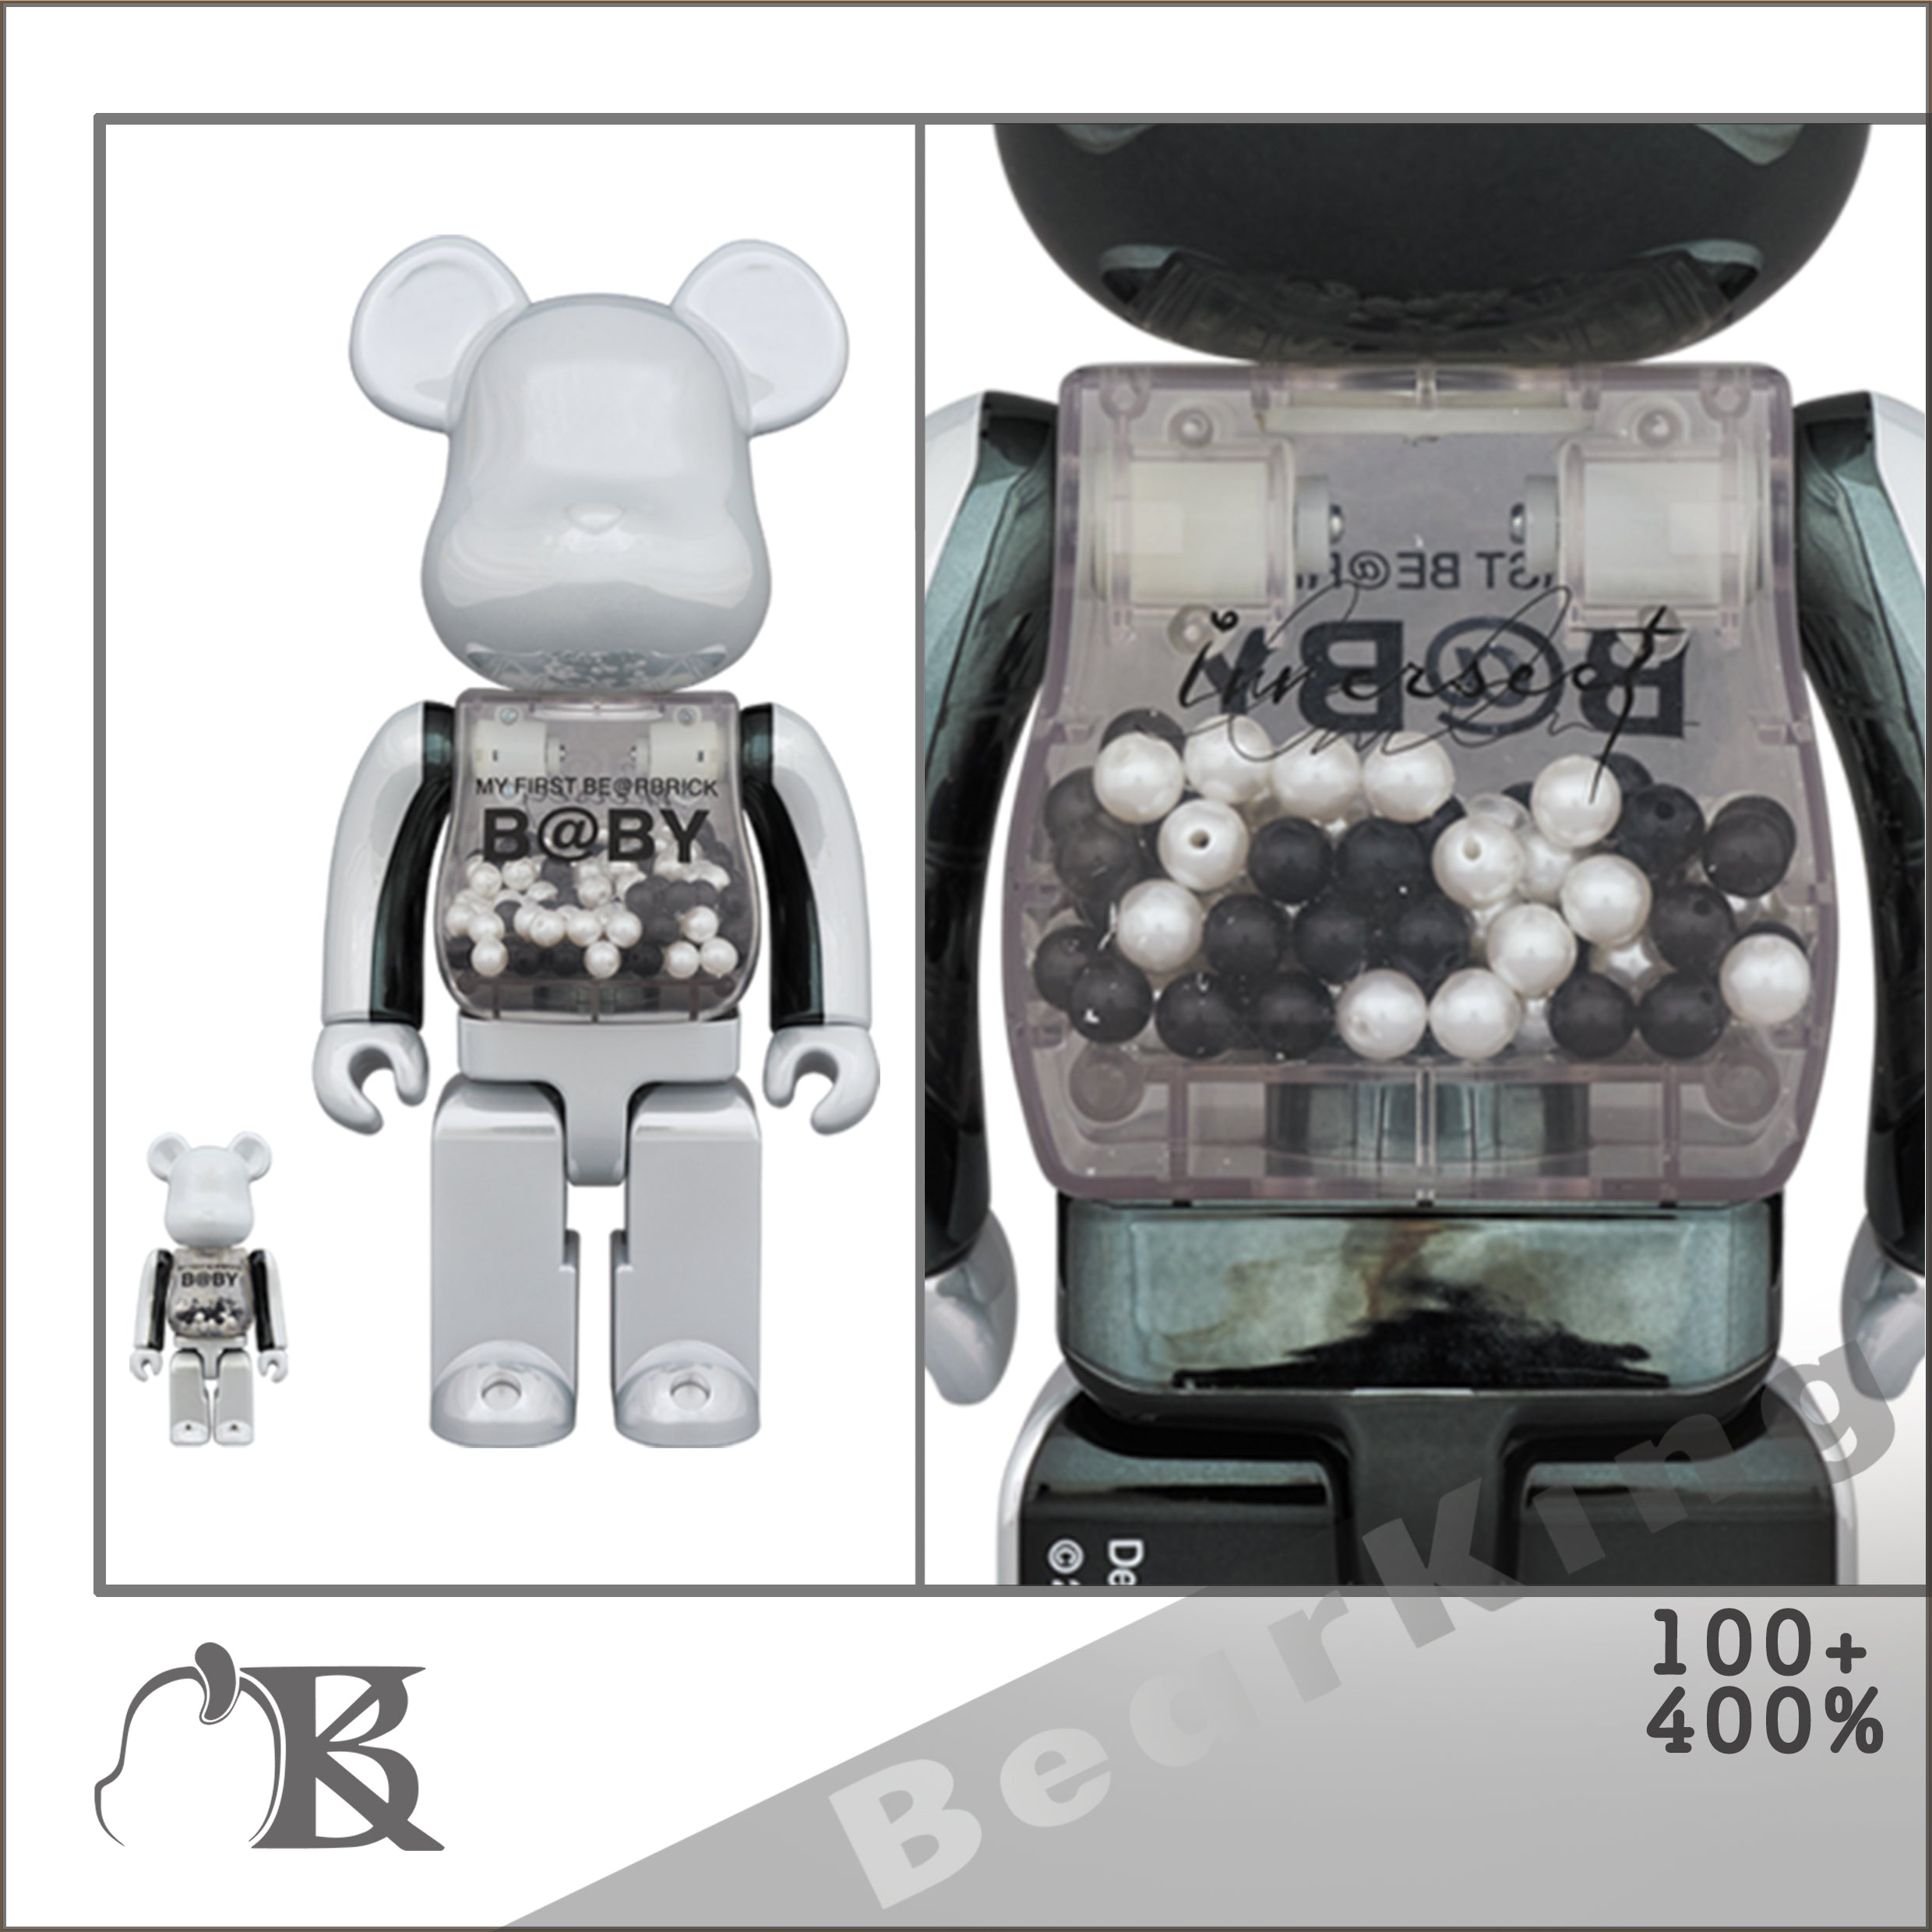 MY FIRST BE@RBRICK B@BY innersect Ver. 100％ ＆ 400％ 千秋 Baby 黑白